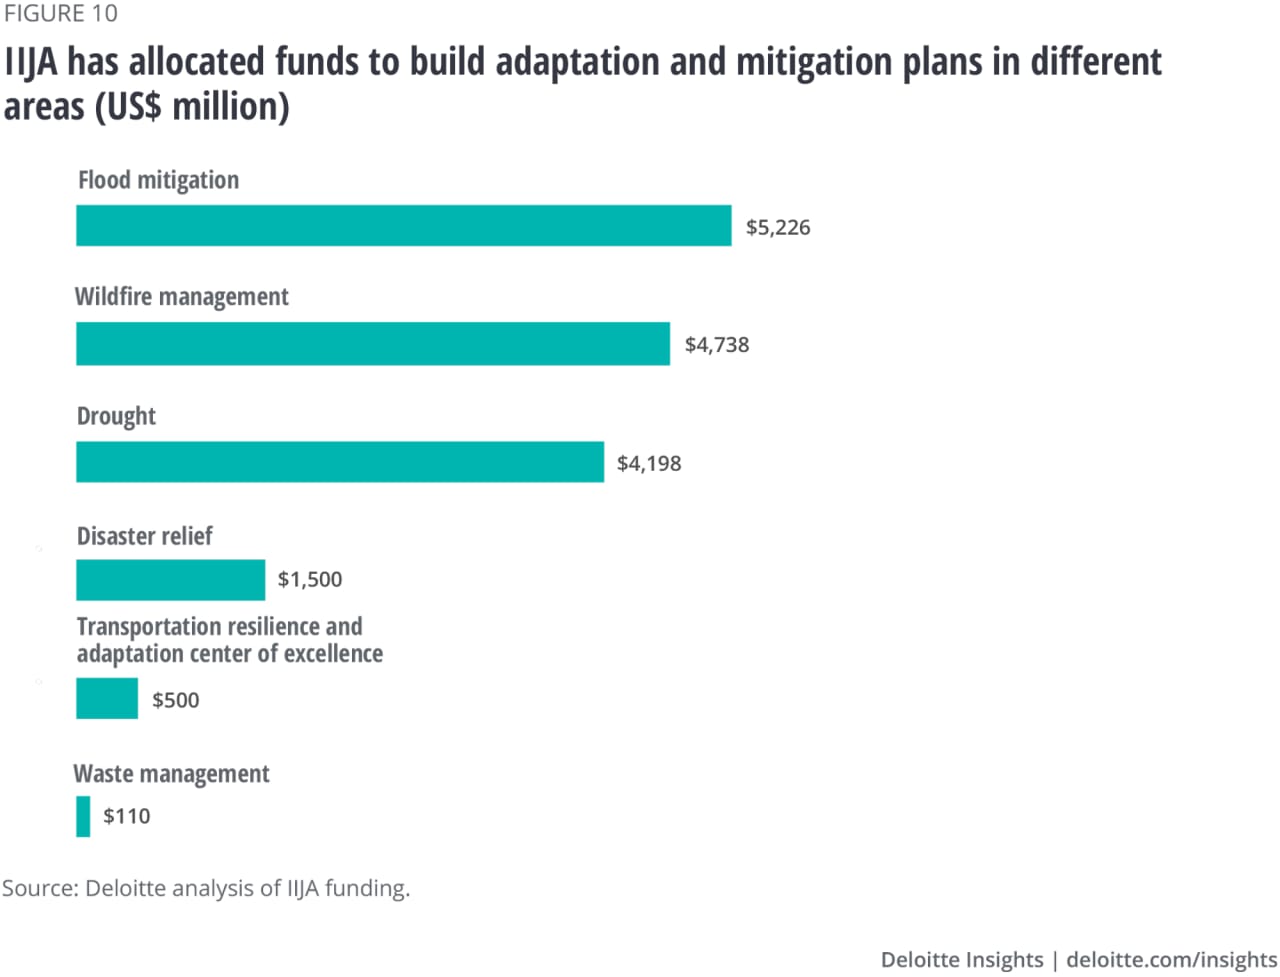 Figure 10. IIJA funding for adaptation and mitigation (in US$B)